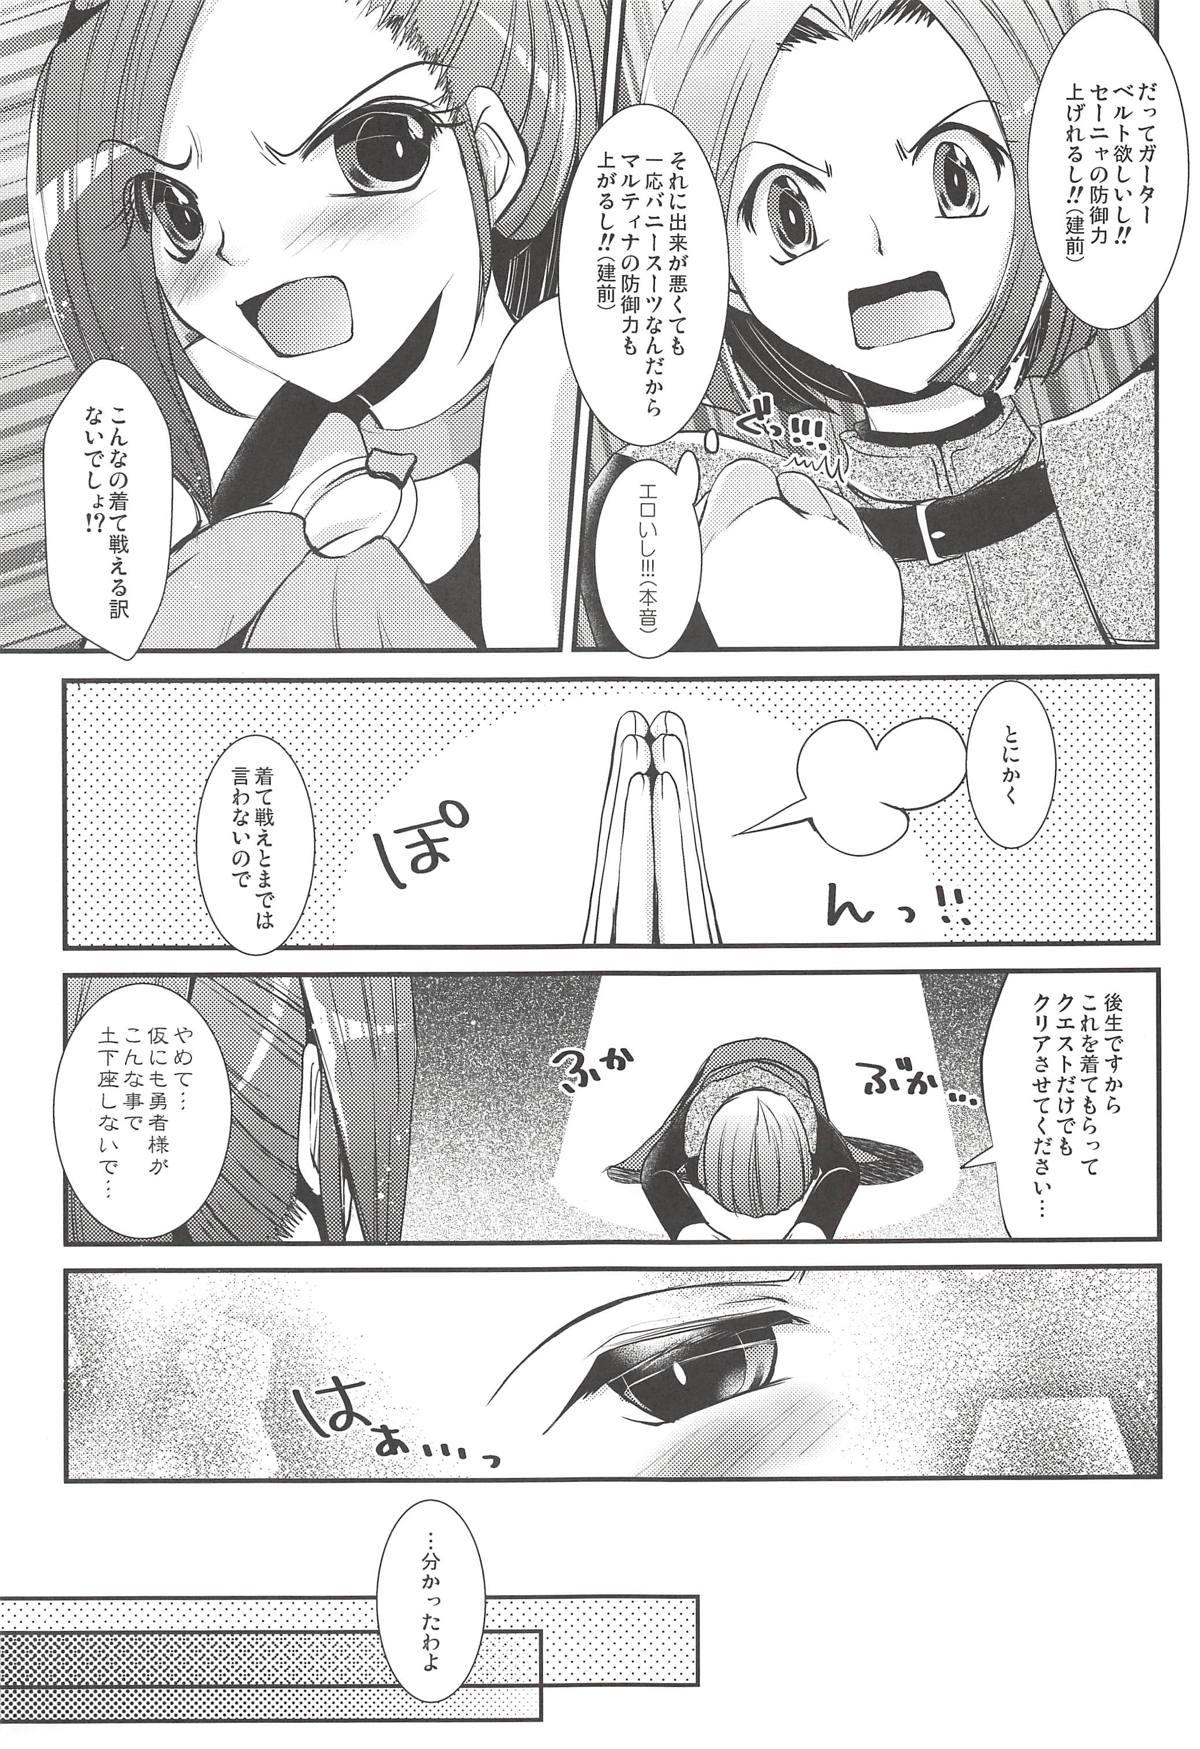 Fudendo Shippai Bunny - Failure of Bunny Suit - Dragon quest xi Chinese - Page 6